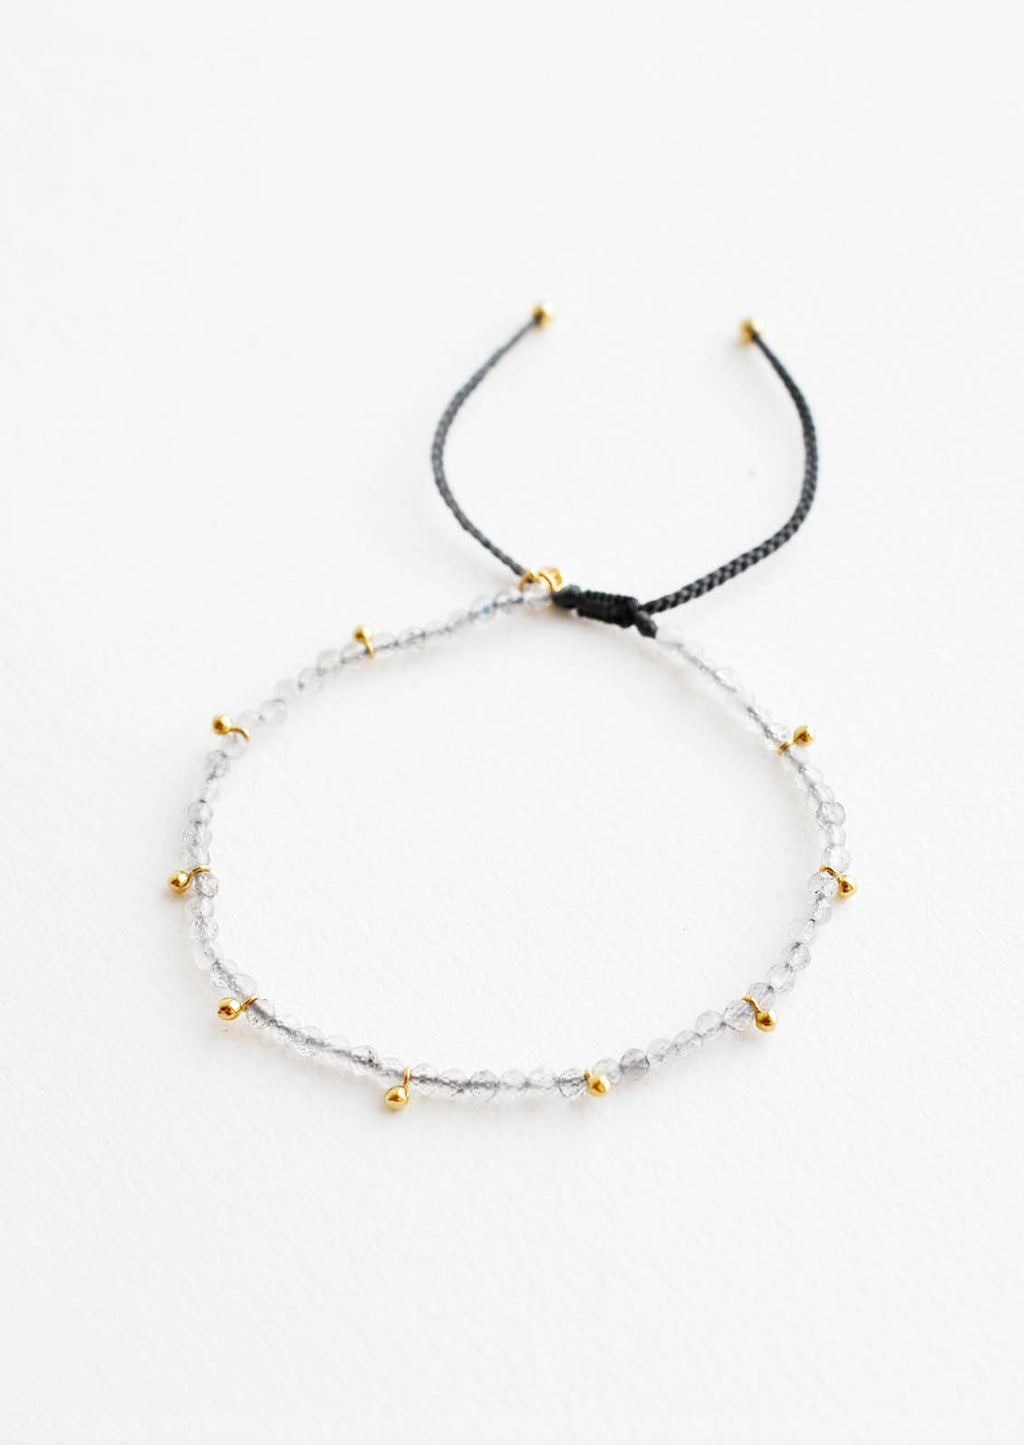 Labradorite: A bracelet of small gray gemstones and evenly spaced gold beads.